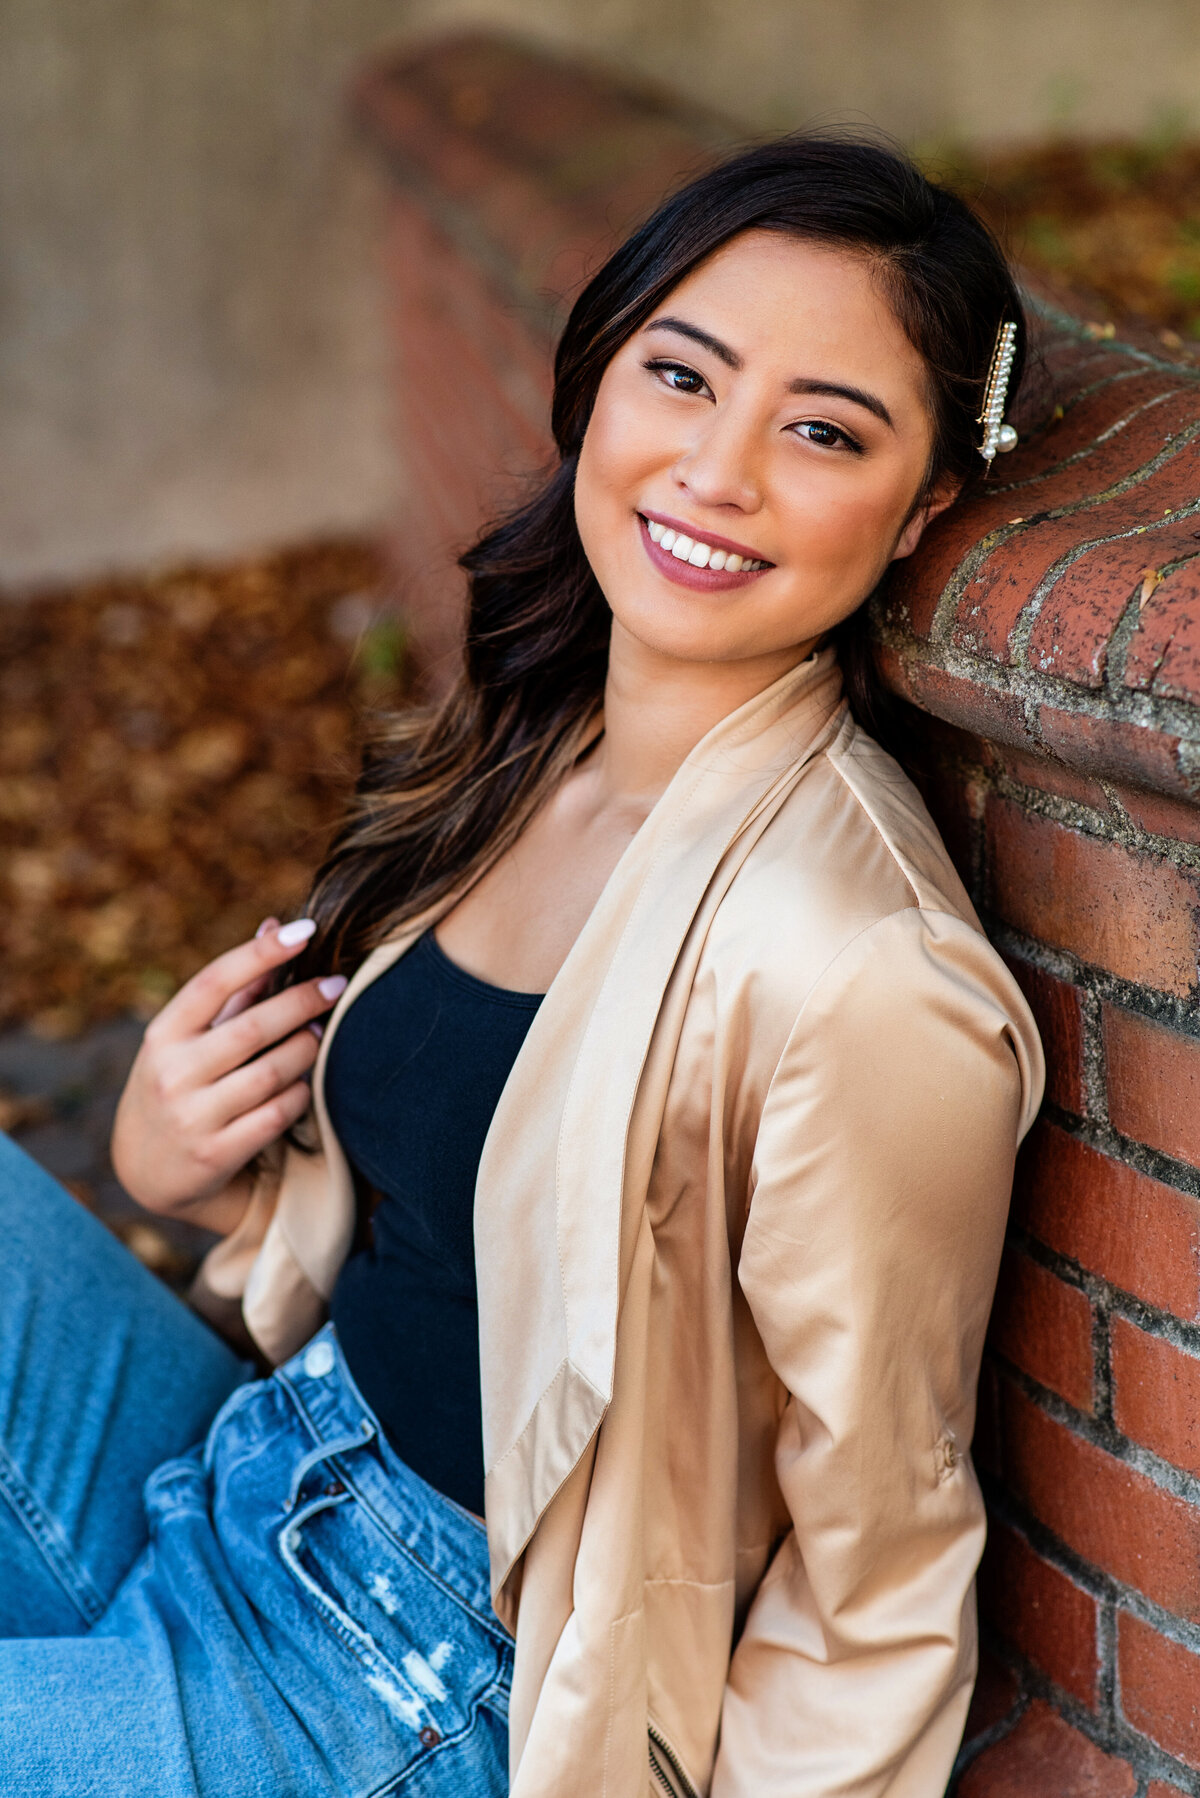 Senior girl leans against brick wall and smiles during her portrait session downtown Richmond, VA.